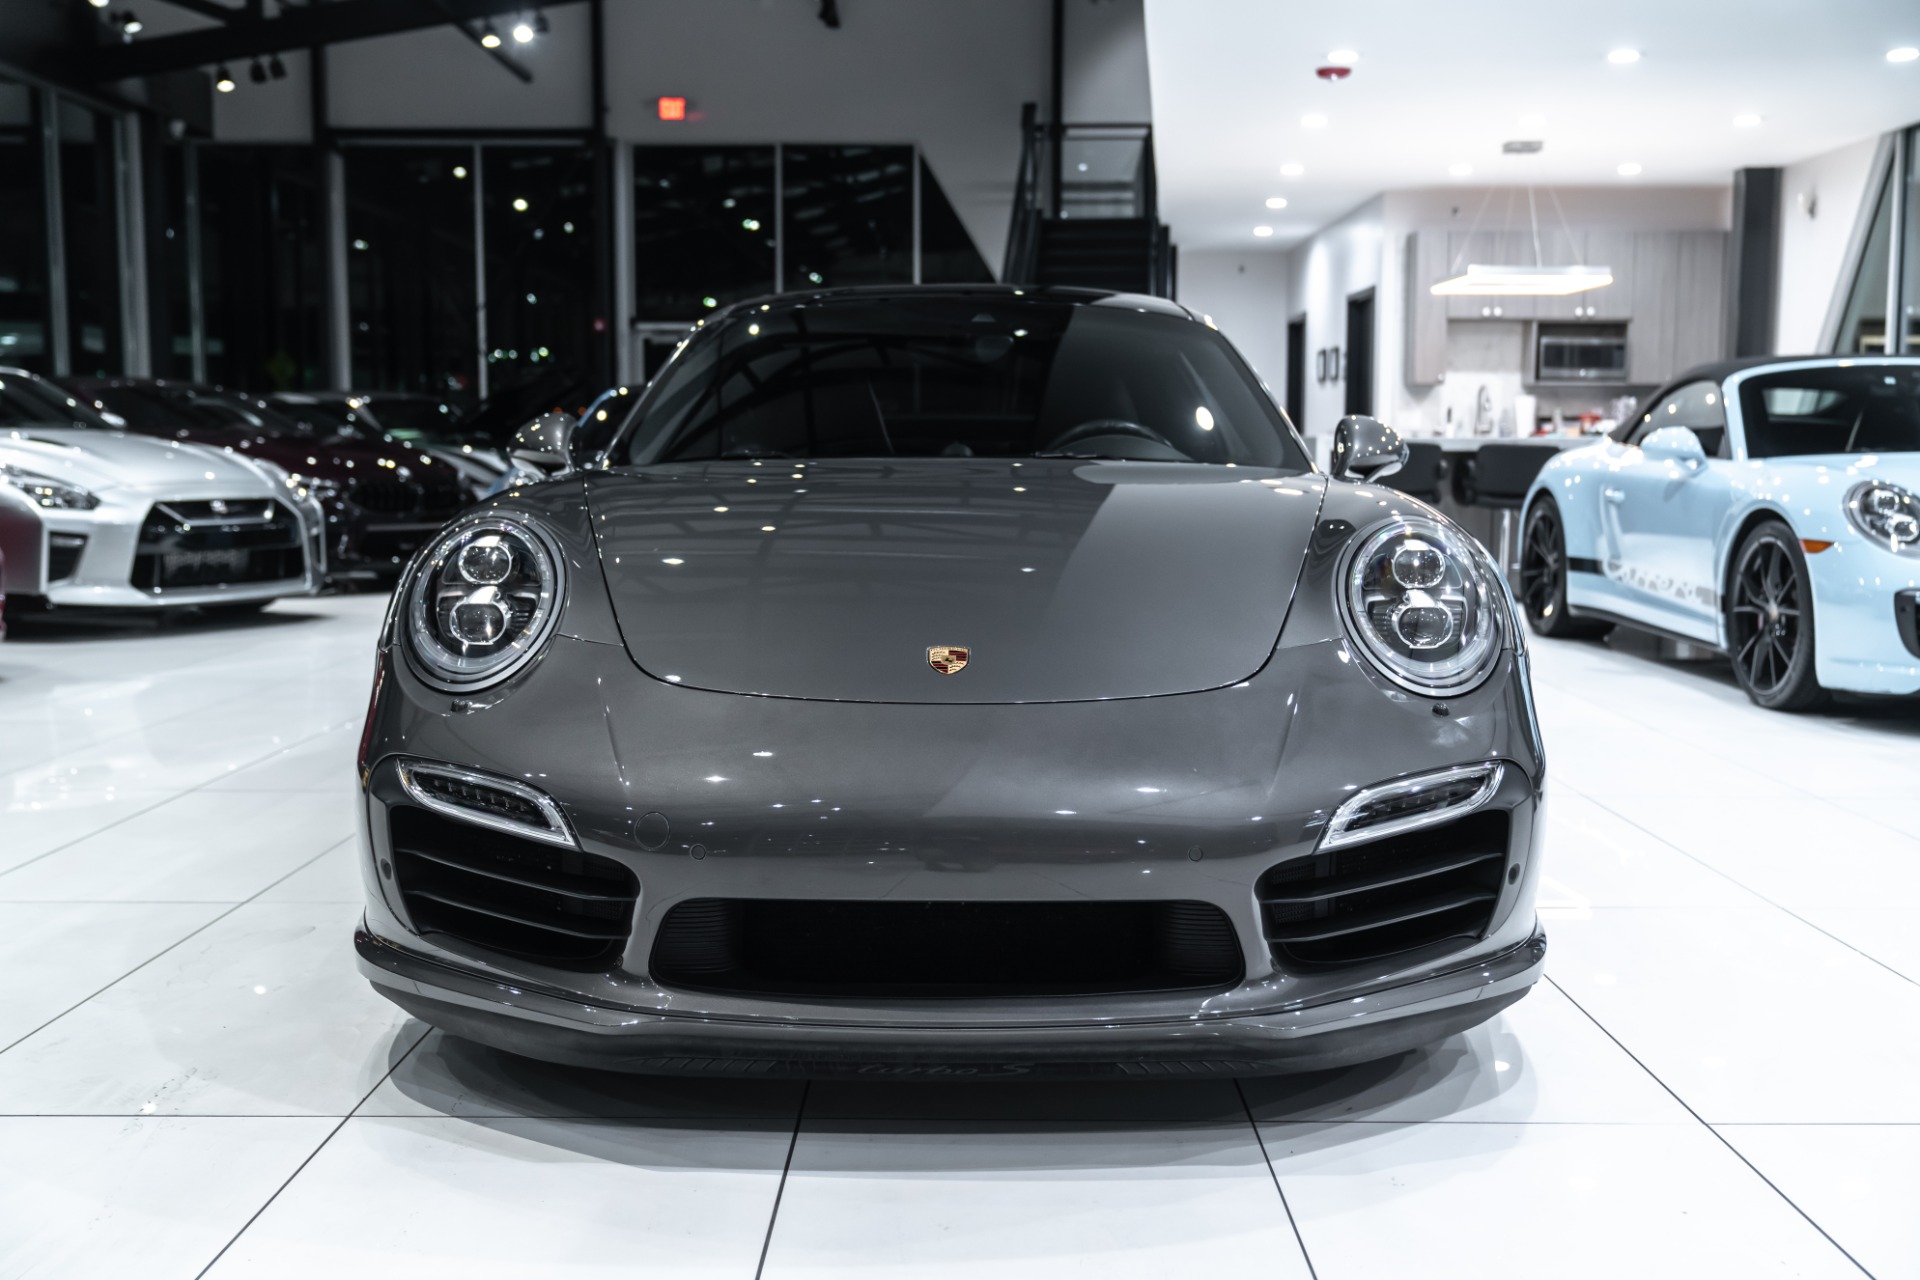 Used-2015-Porsche-911-Turbo-S-Coupe-Tial-68MM-VTG-Turbos-Supporting-Mods-w-Receipts